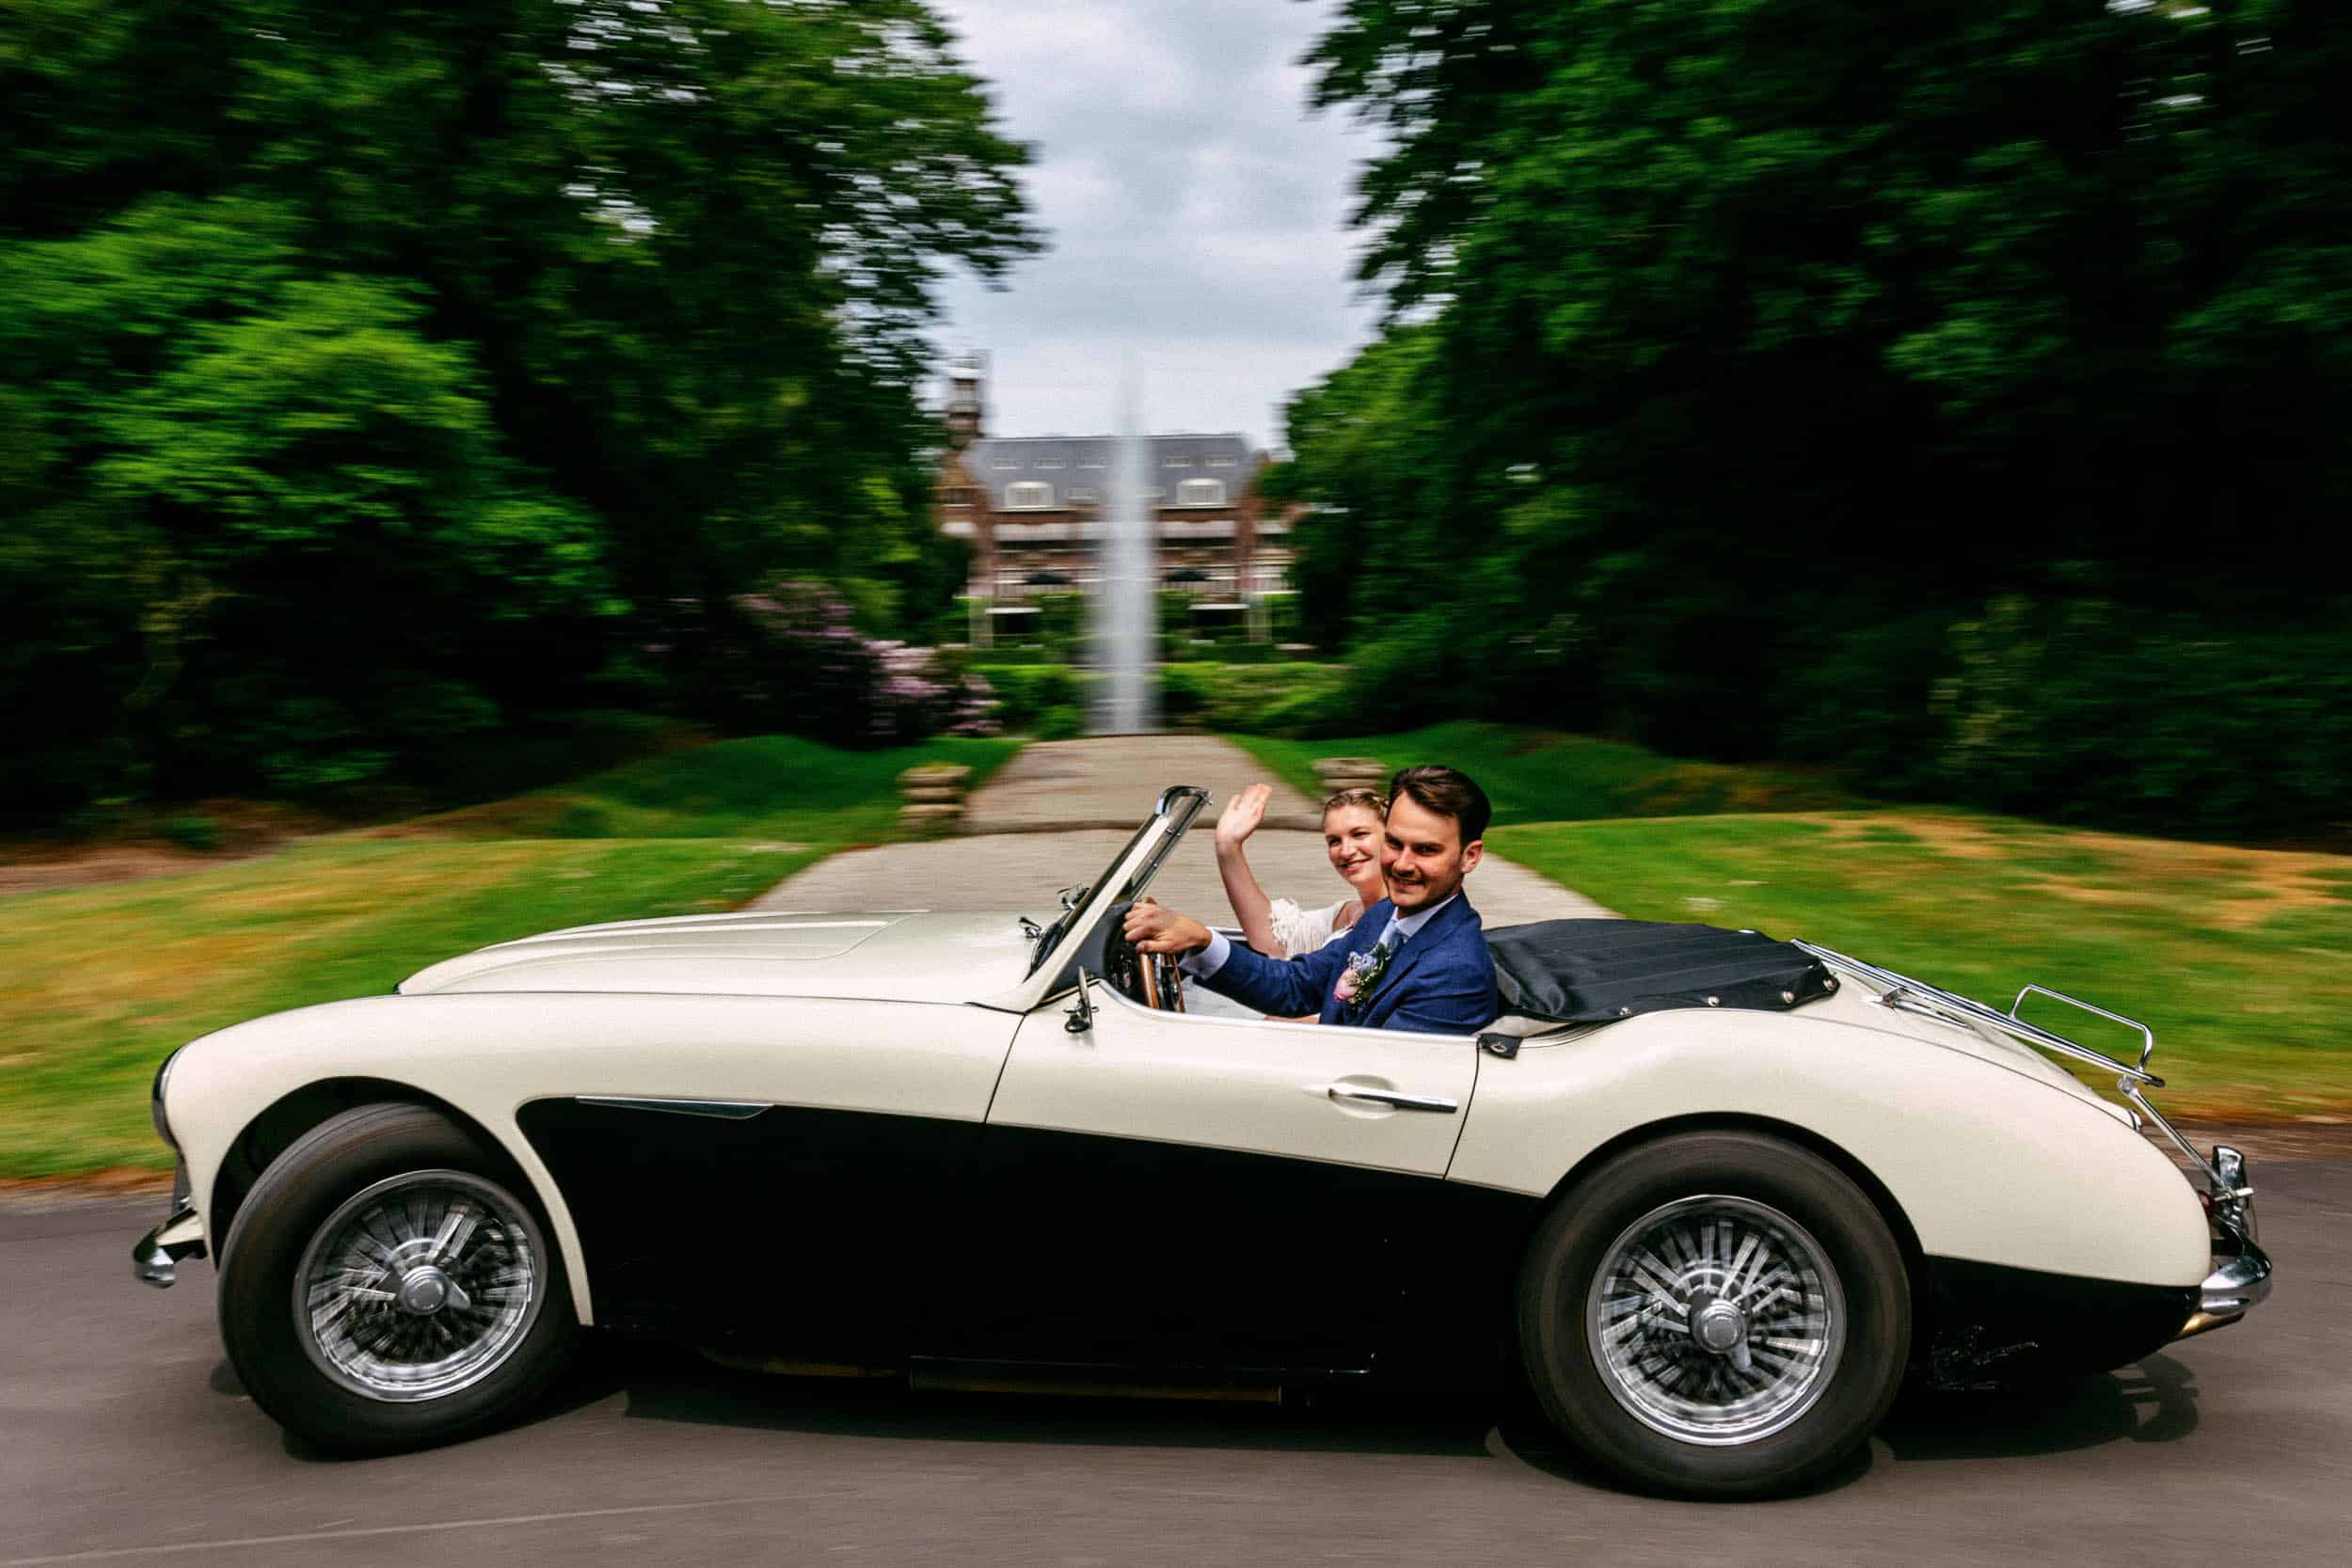 A man and a woman in a vintage sports car.